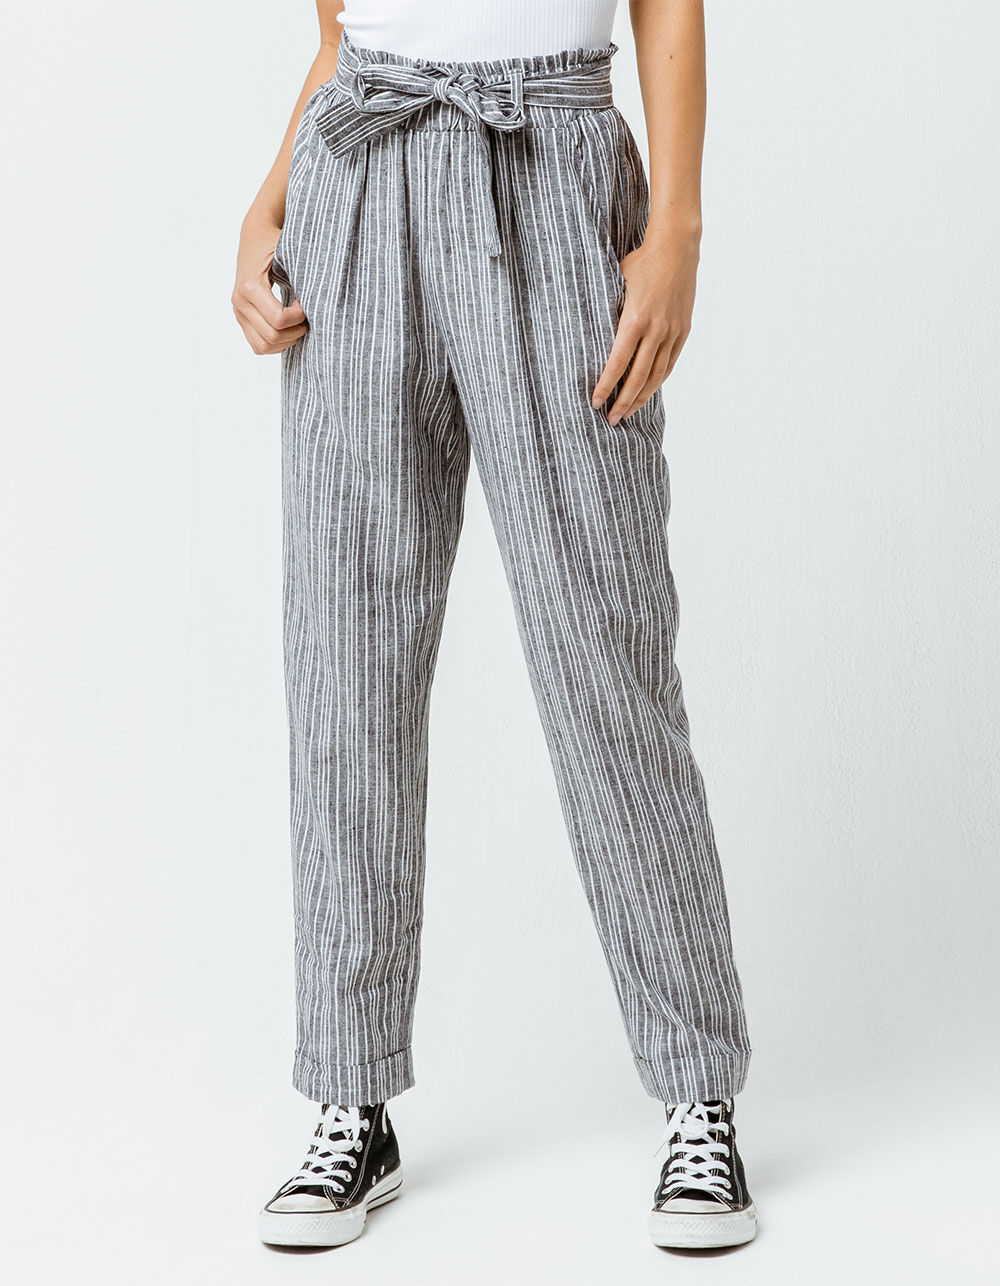 SKY AND SPARROW Stripe Paperbag Waist Womens Trouser Pants - BLK/WHT ...